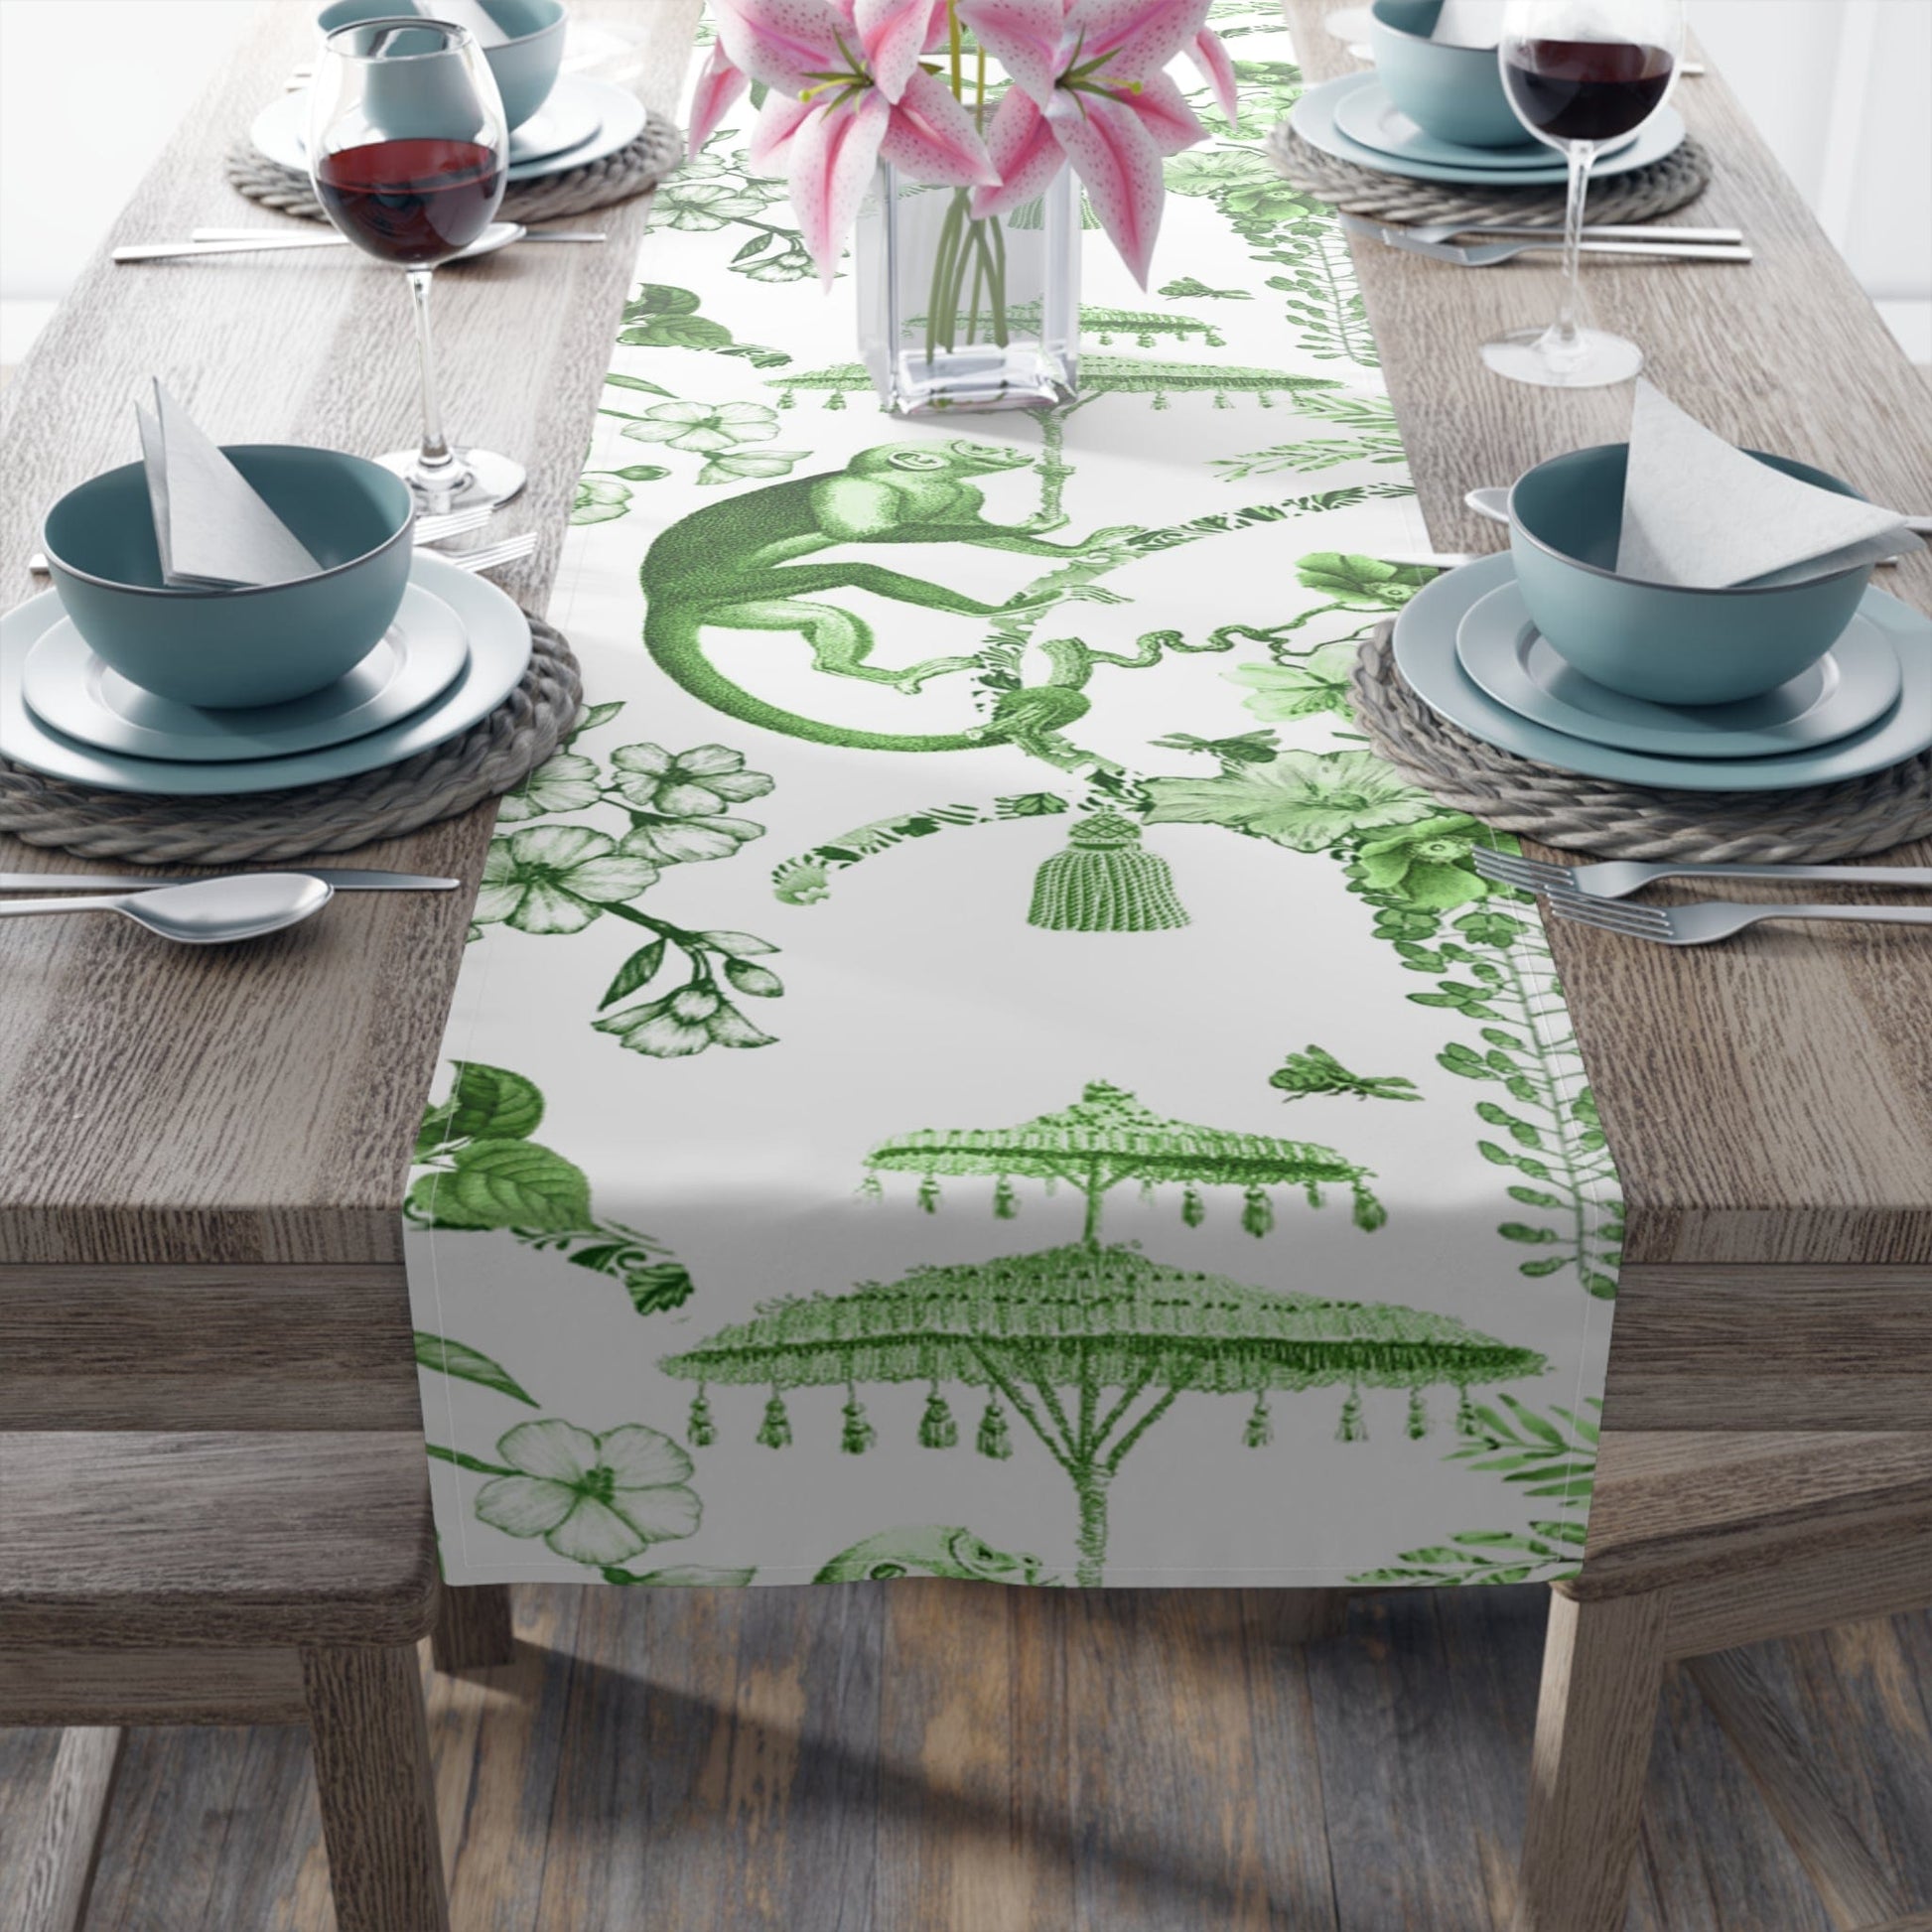 Printify Chinoiserie Botanical Toile Table Runner, Floral Green, White Chinoiserie Jungle, Country Farmhouse Grandmillenial Table Decor Home Decor 16" × 72" / Cotton Twill 82614827852796664693